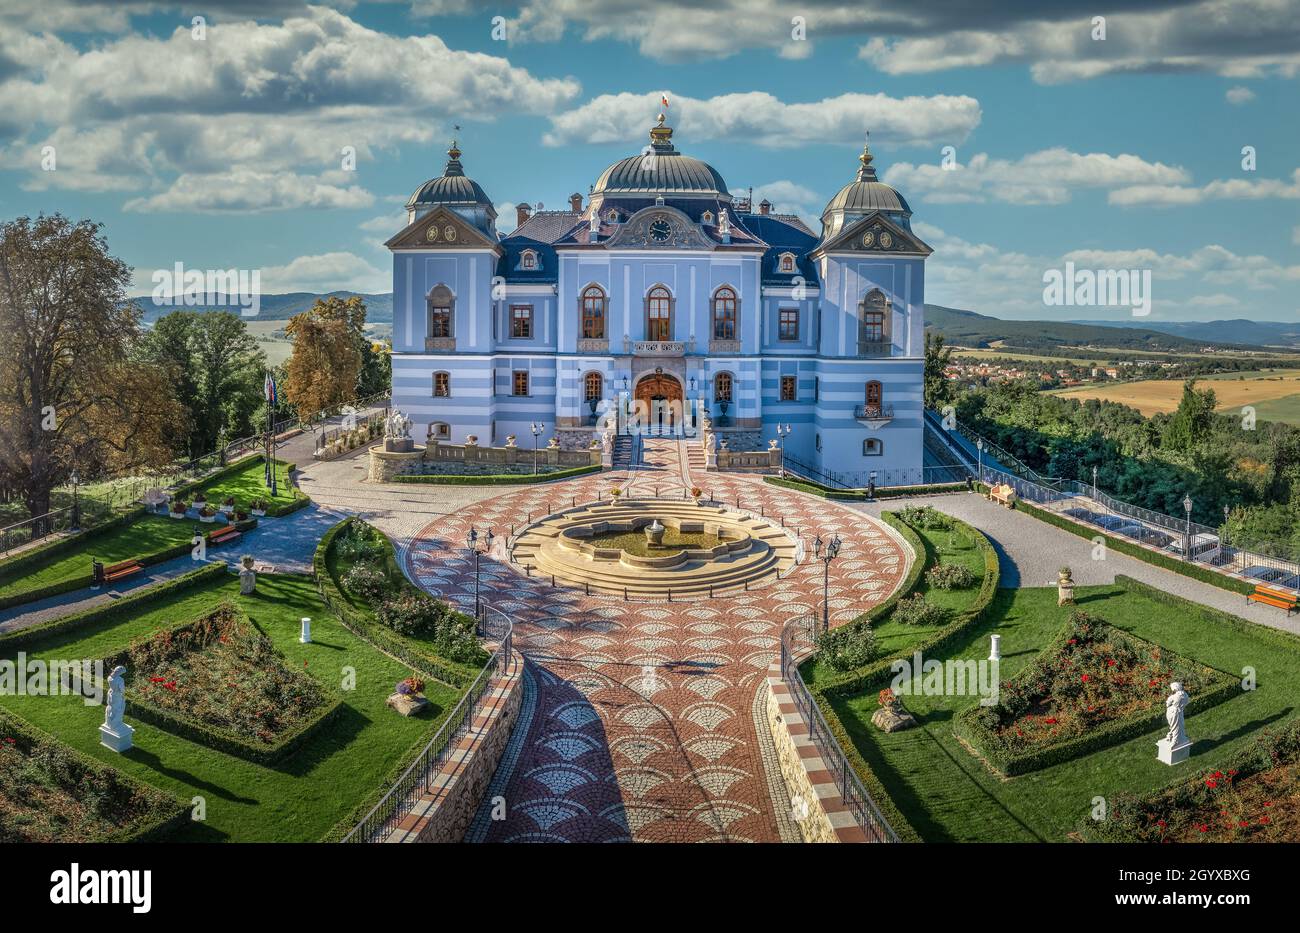 Aerial view of baroque castle with blue walls and manicured garden in Halic Slovakia Stock Photo